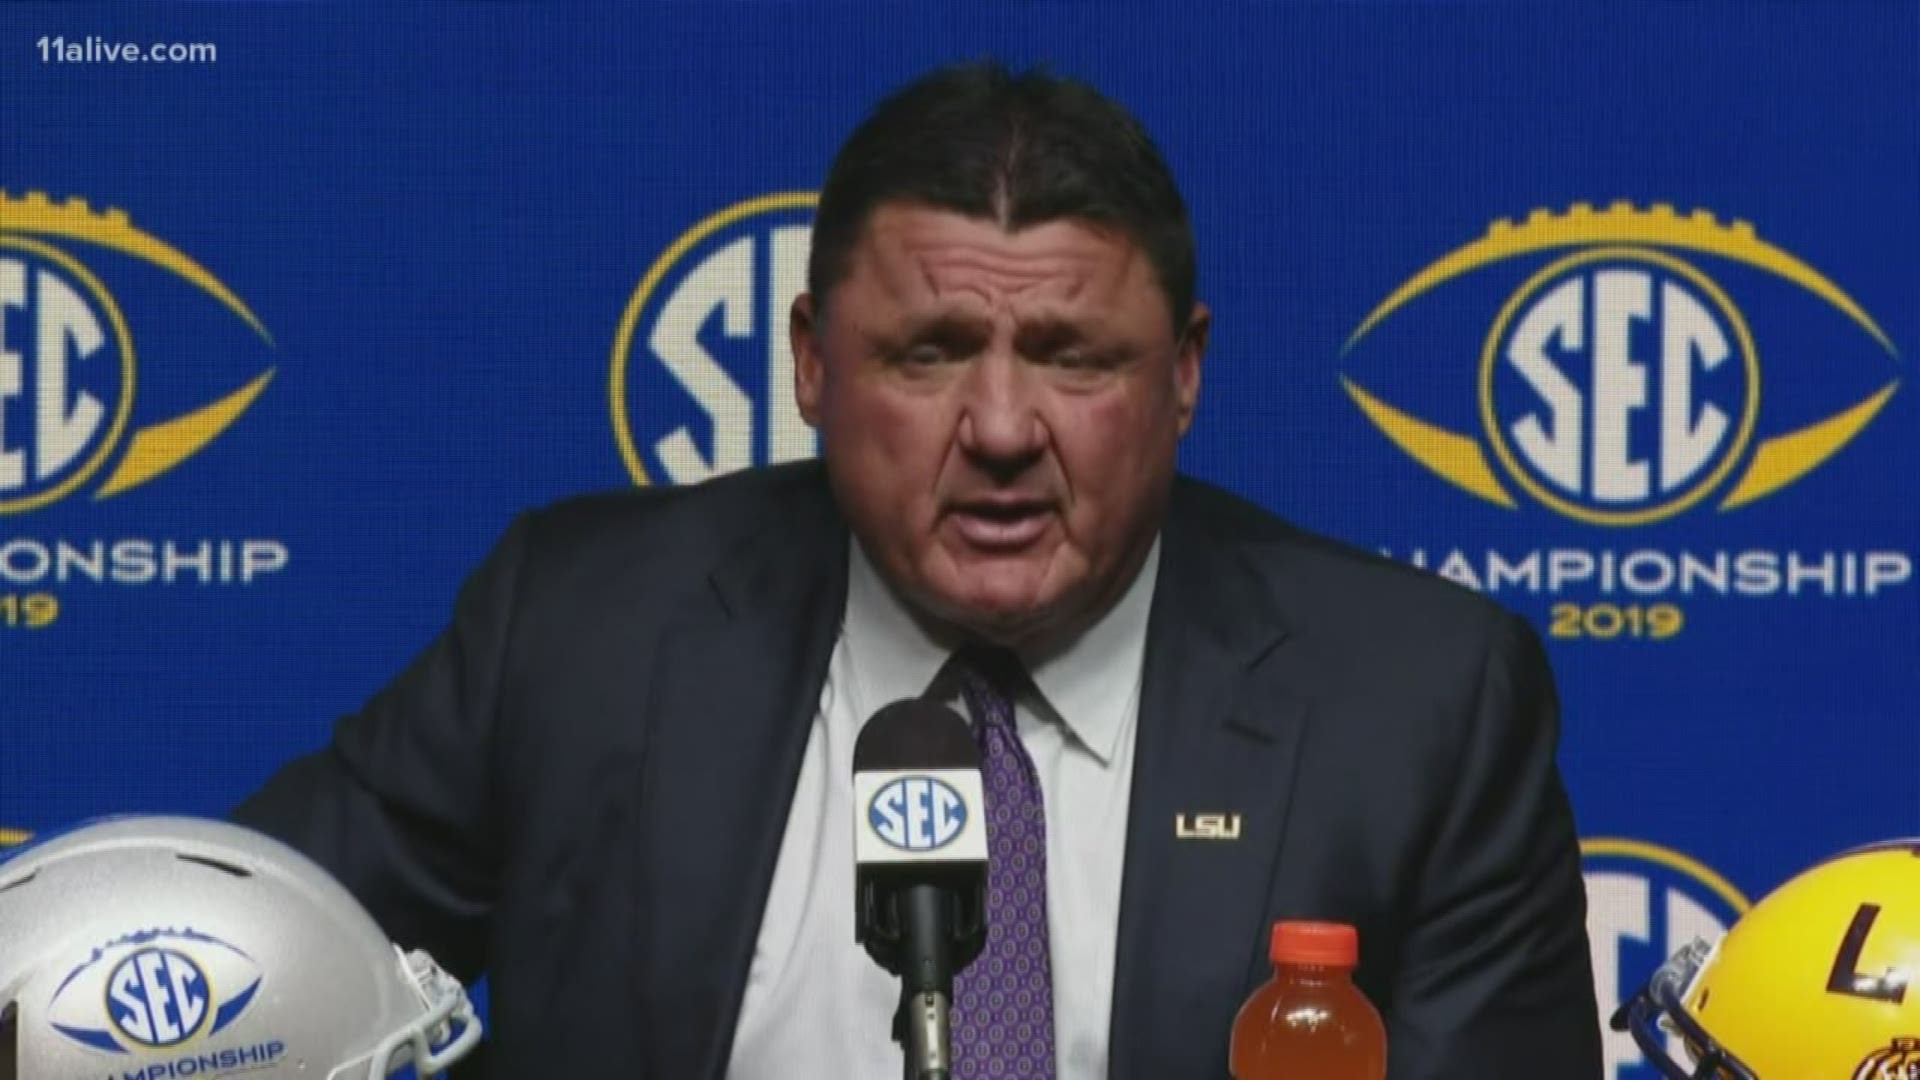 LSU Tigers coach Ed Orgeron talked about the Georgia Bulldogs, Joe Burrow and the Heisman Trophy and many other topics. LSU faces UGA in SEC Championship.